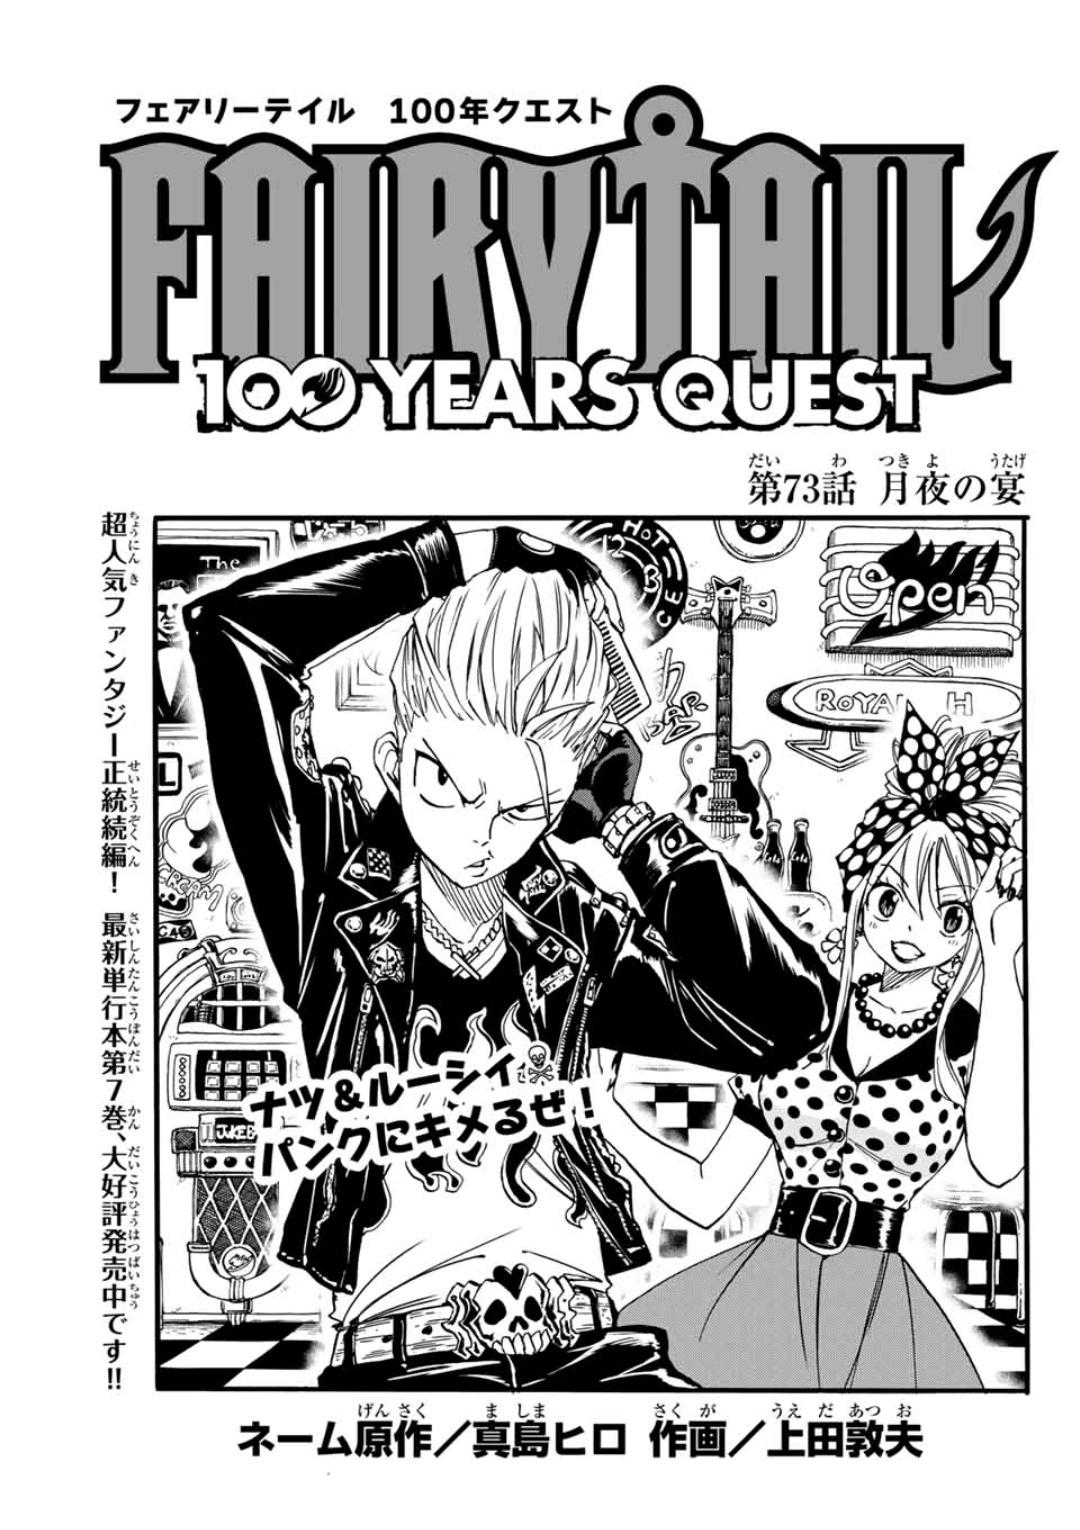 Fairy Tail 100 Years Quest Chapter 73 Fairy Tail Wiki Fandom